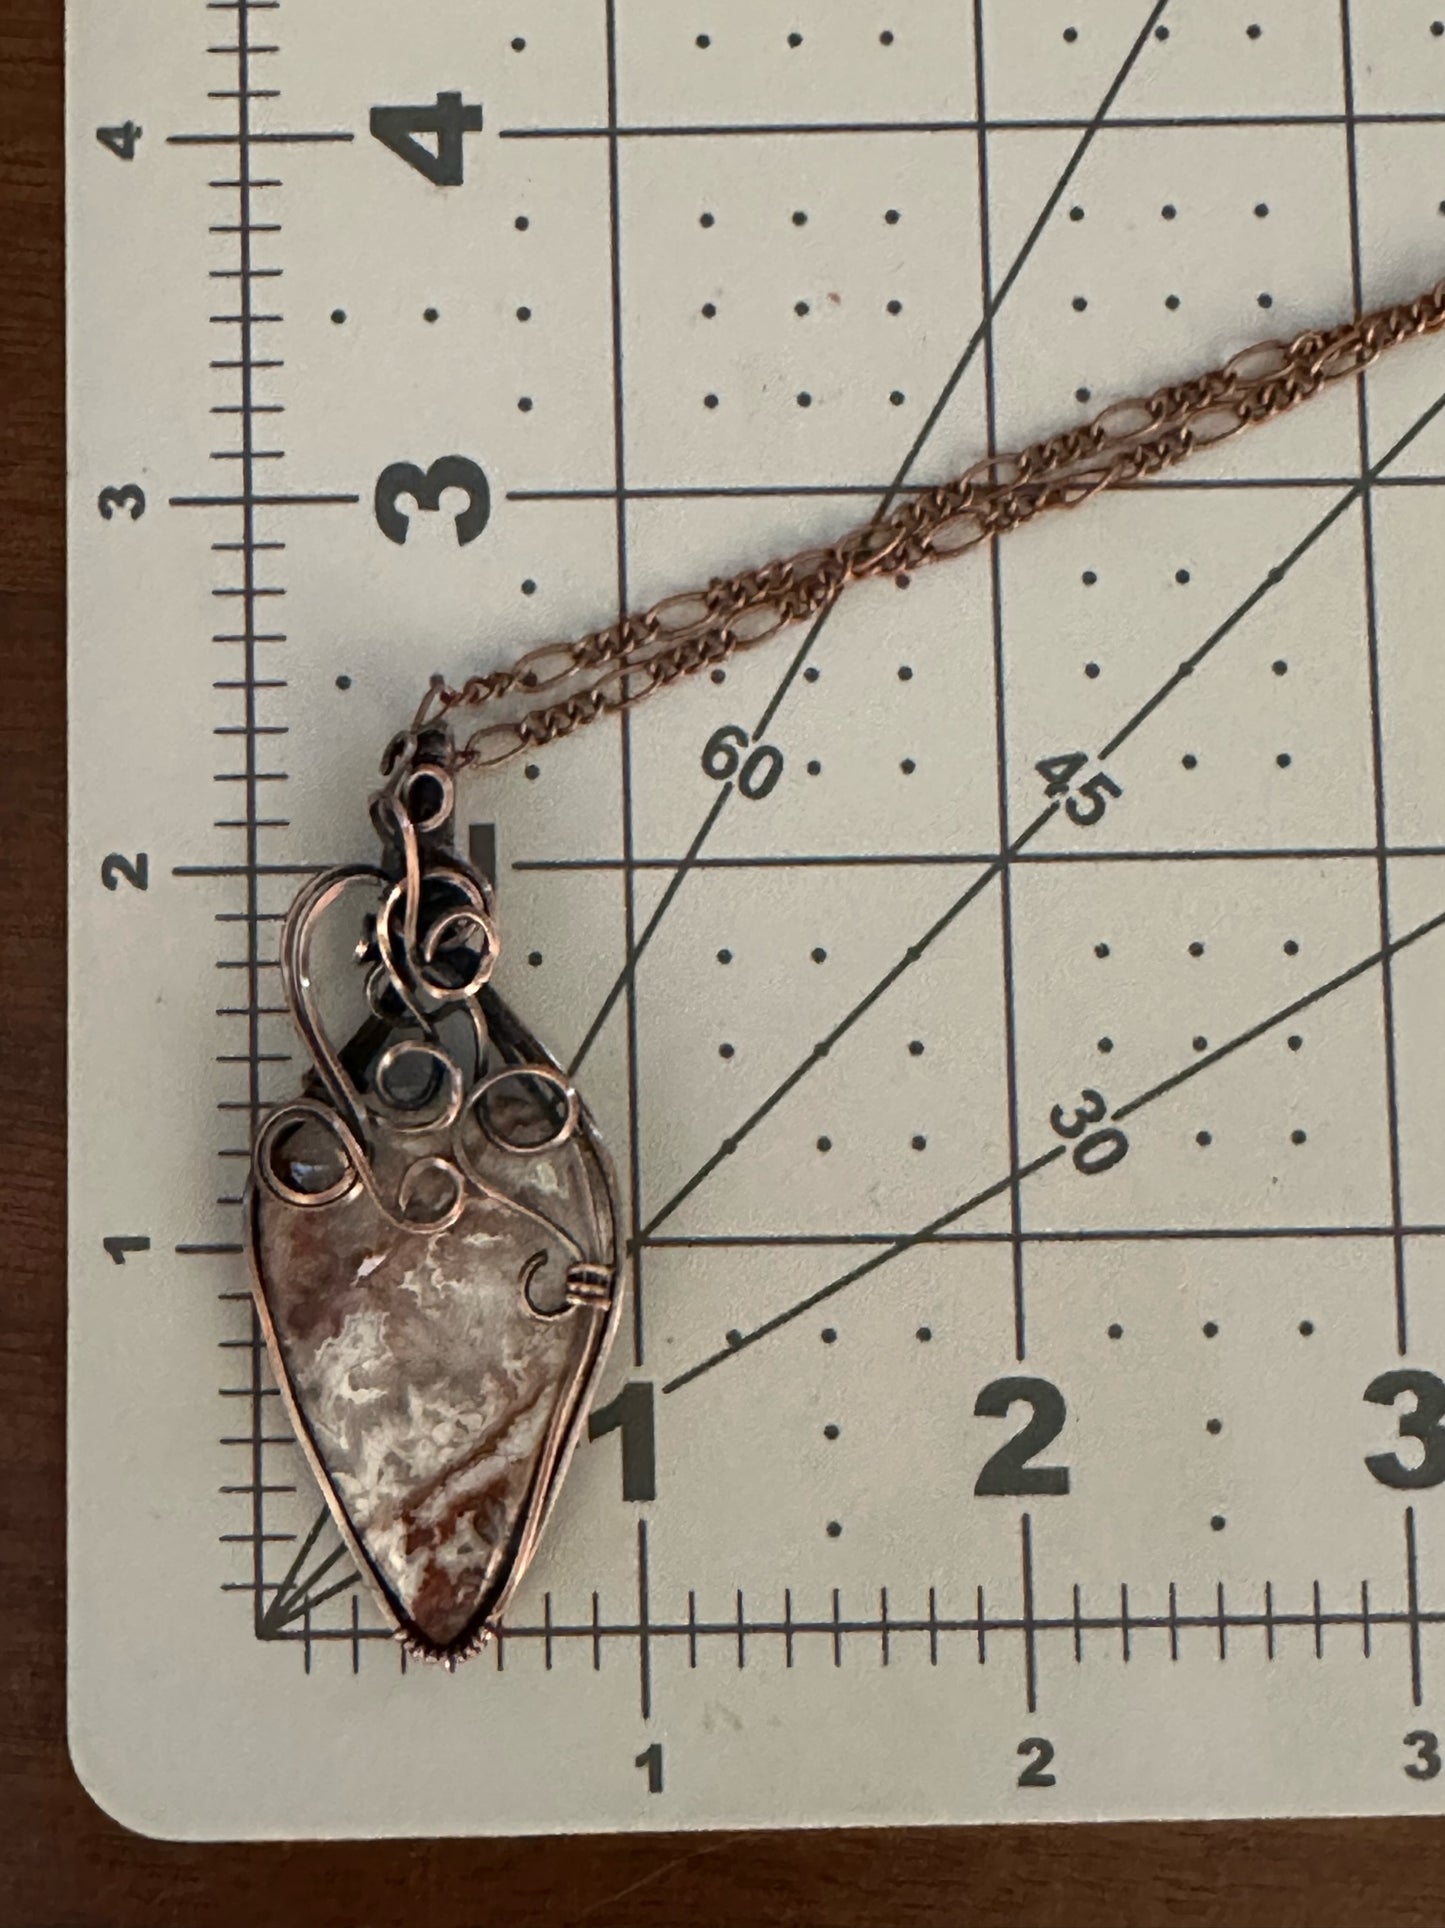 Teardrop Crazy Lace Copper Wire Wrapped Pendant